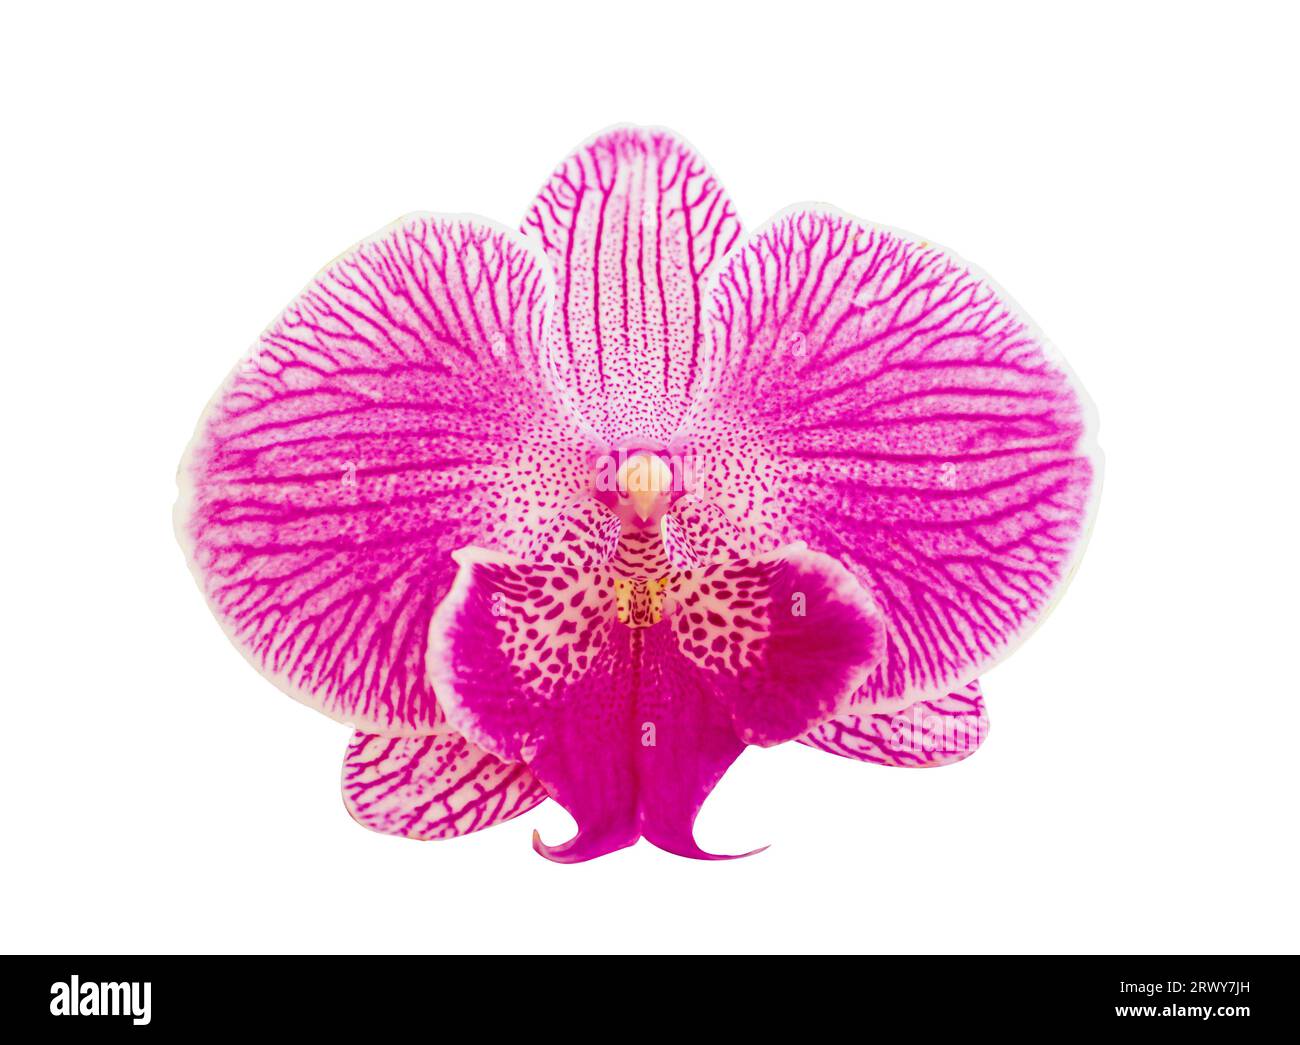 Beautiful Pink with orchid flower with big petals with stripes isolated on white background. Pink Doritaenopsis flowers close-up photo isolated on whi Stock Photo